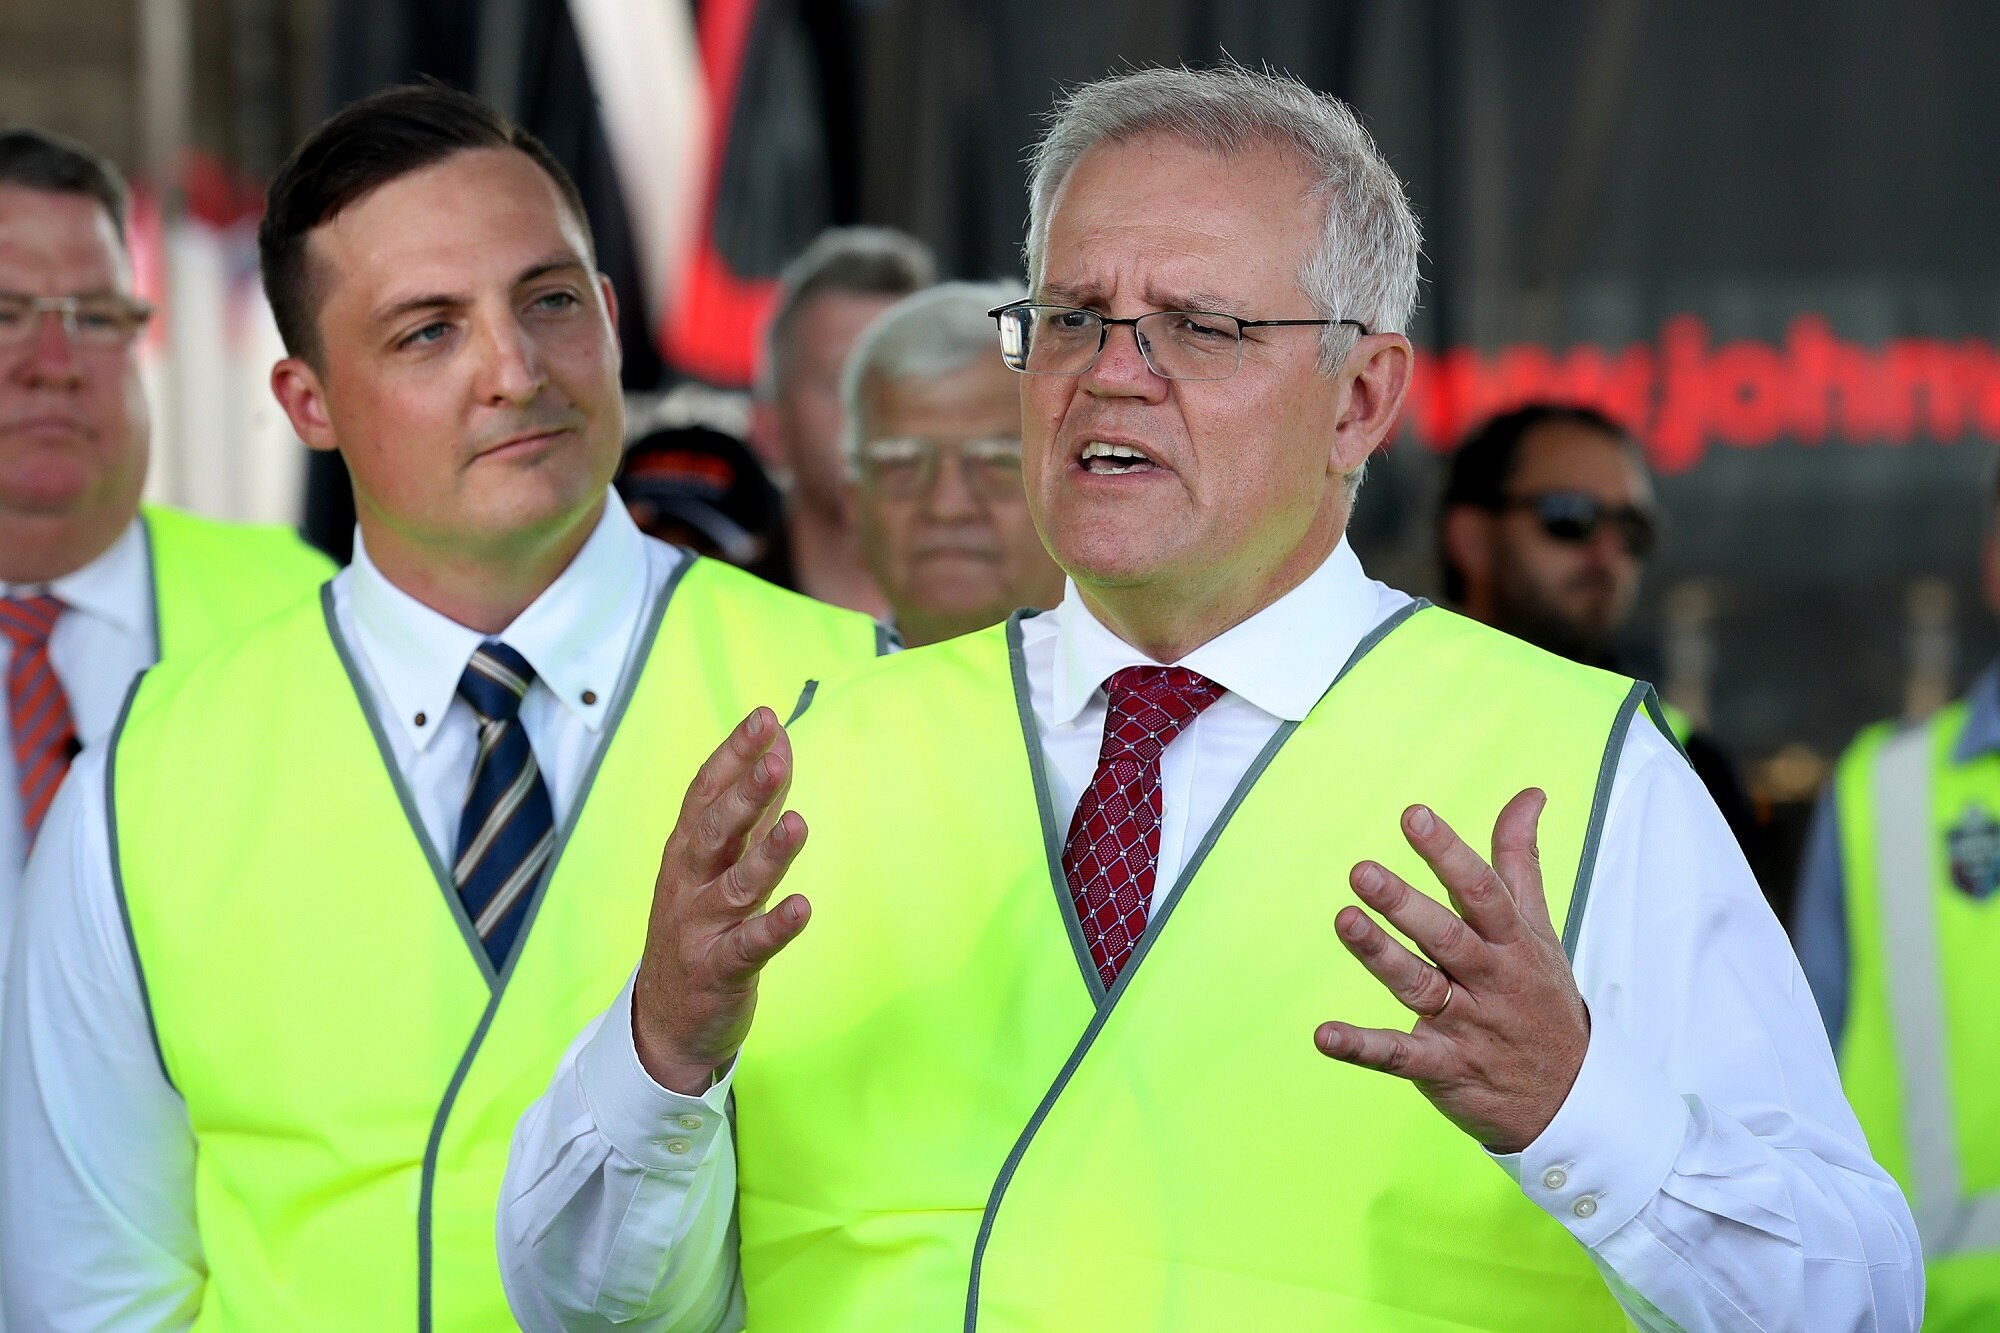 Prime Minister Scott Morrison says Australia will get through the current COVID-19 surge "the Australian way". 